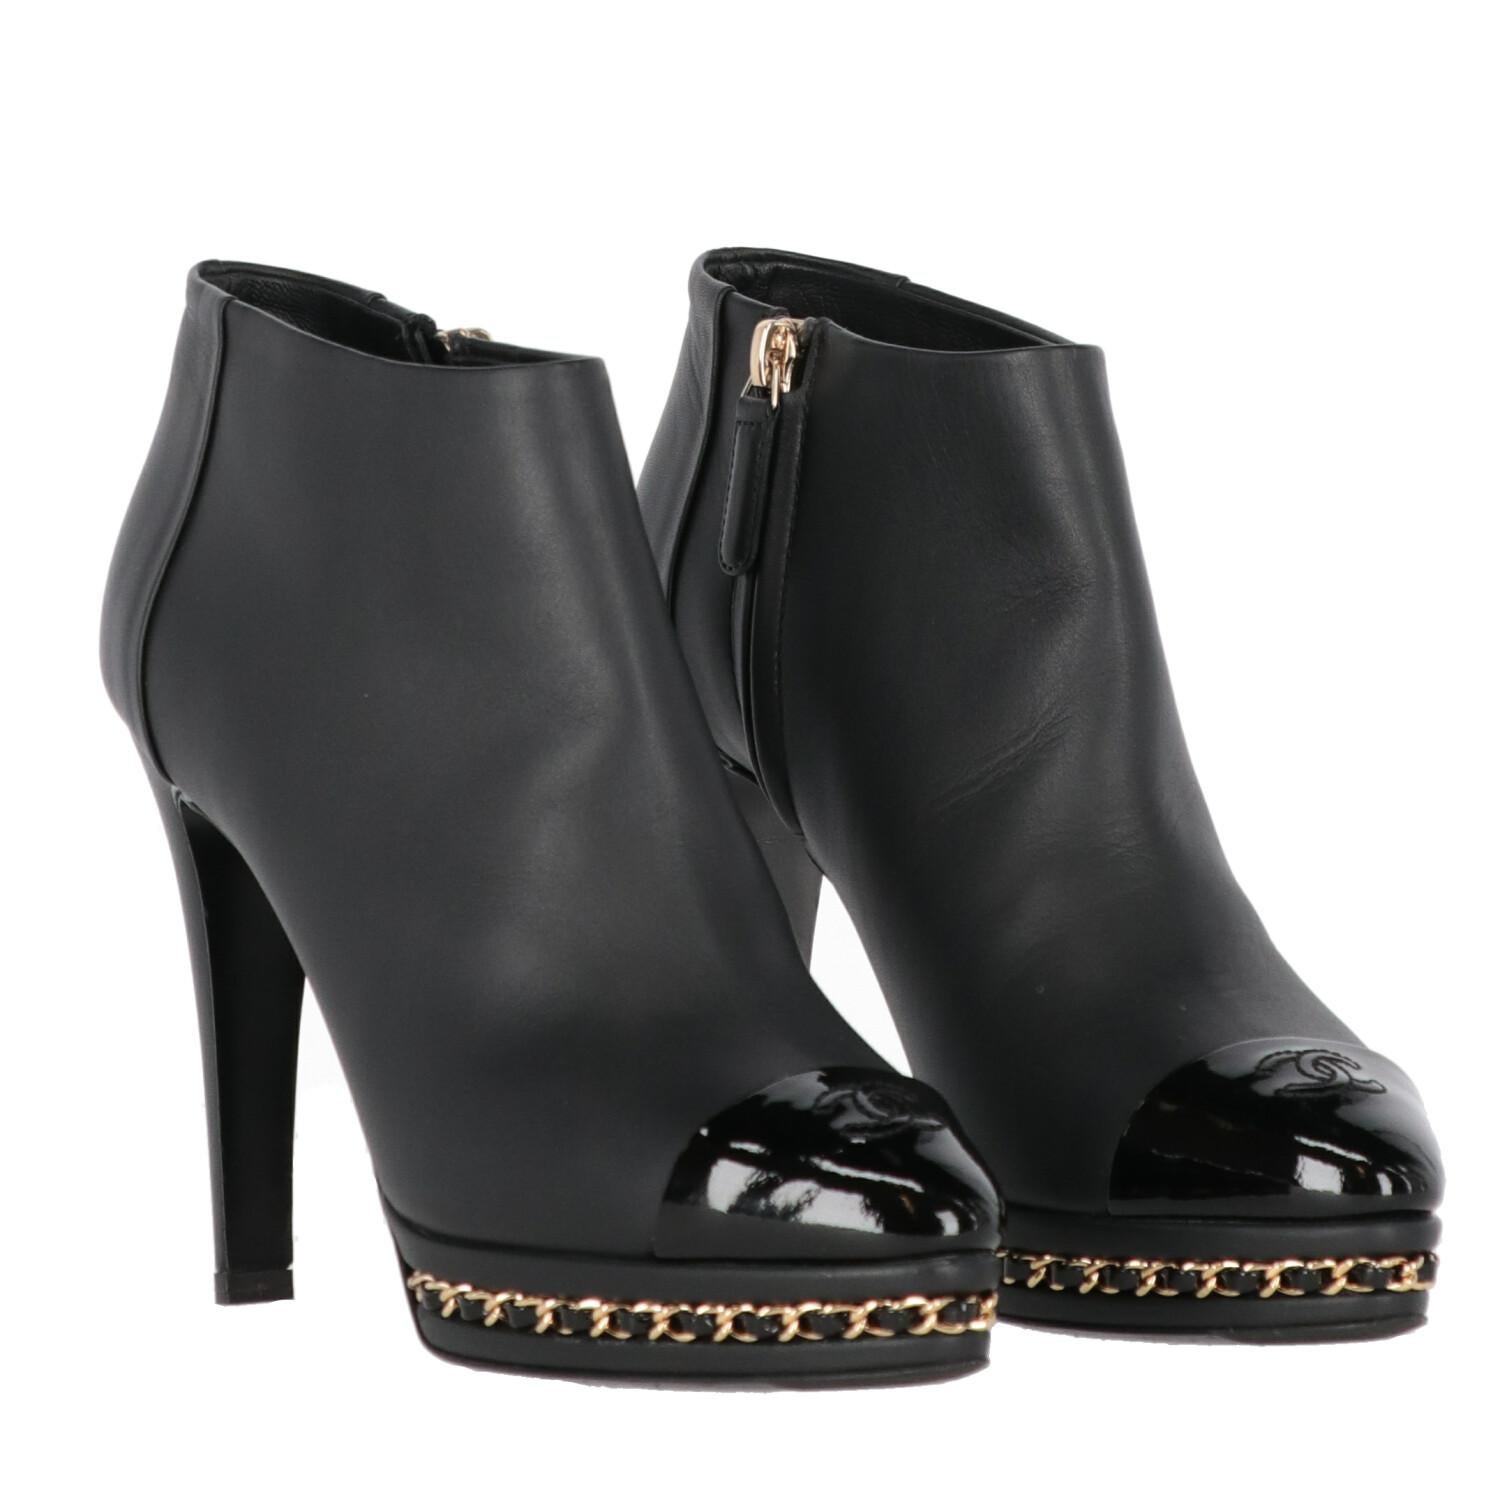 Women's 2010s Chanel Black Leather Ankle Boots